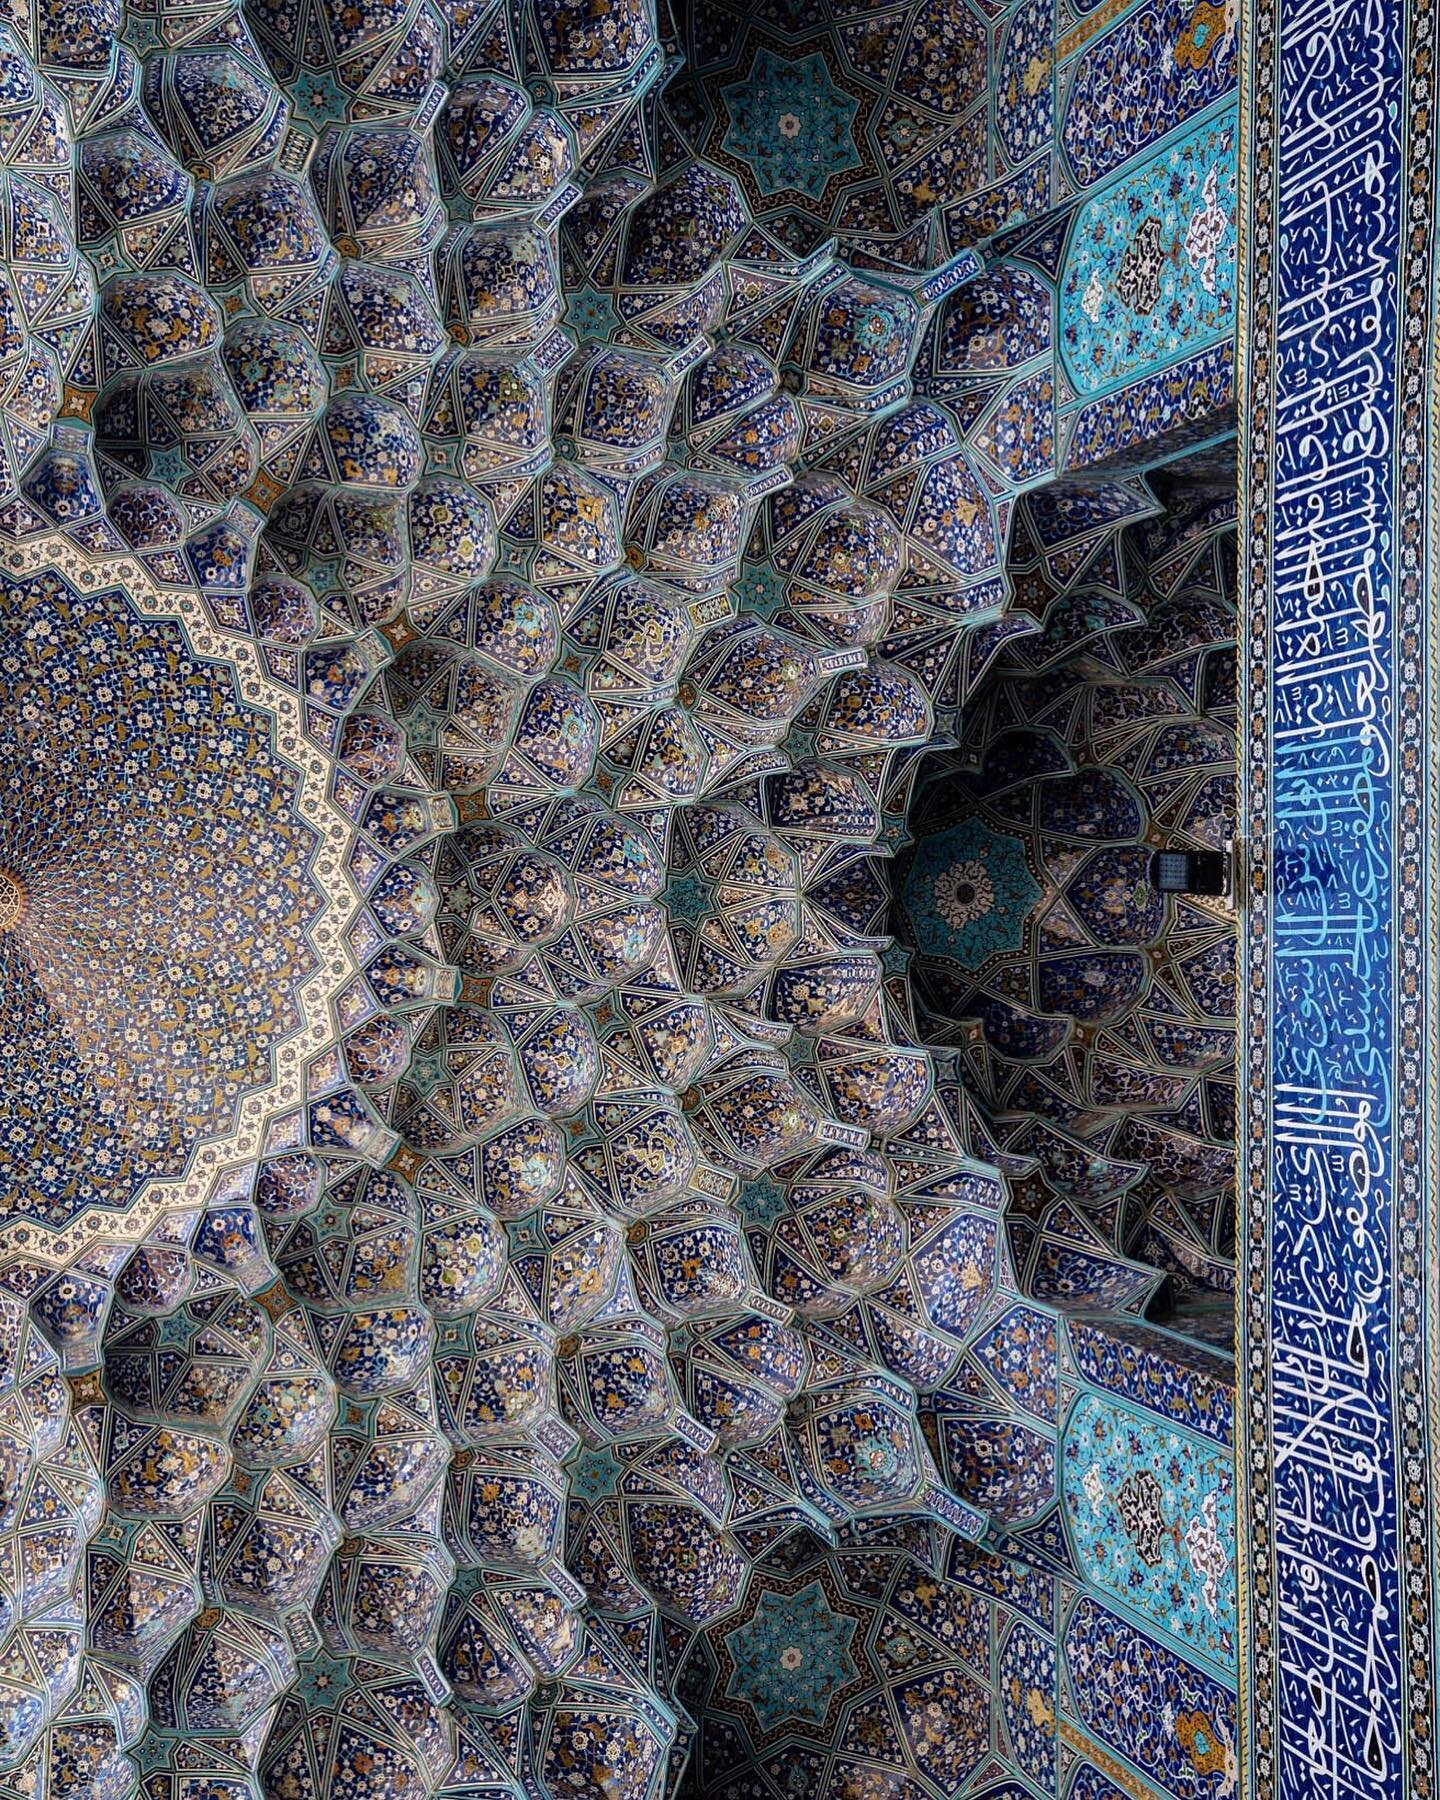 Ceiling details from the Shah mosque in Isfahan, Iran. I sadly had to leave this one out of the physical exhibition of &lsquo;The Silk Road: A Living History&rsquo; but it does appear in the online exhibition! Search &lsquo;Silk Road Living History&r